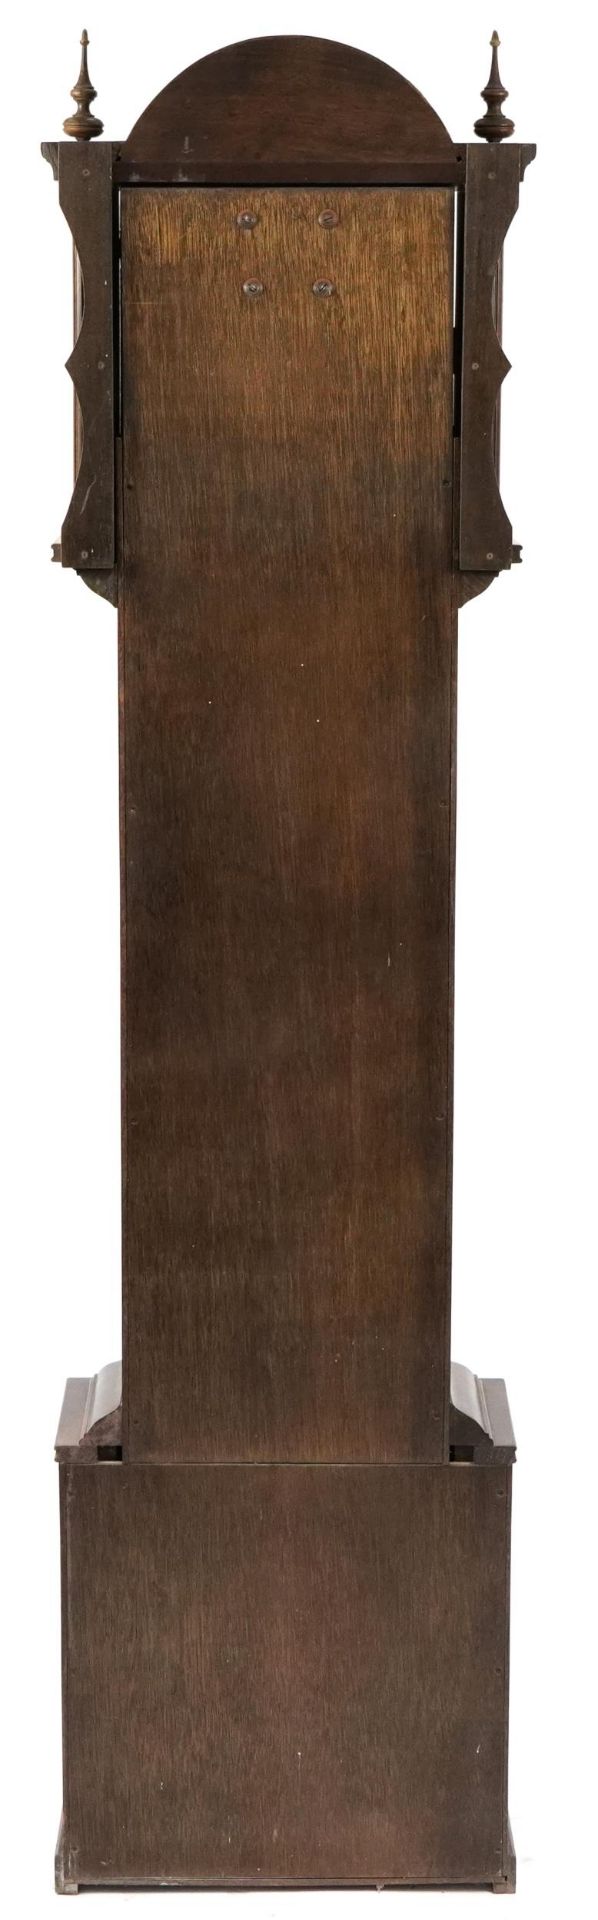 Fenclocks Suffolk oak long case clock with moon phase dial, 188cm high - Image 4 of 4